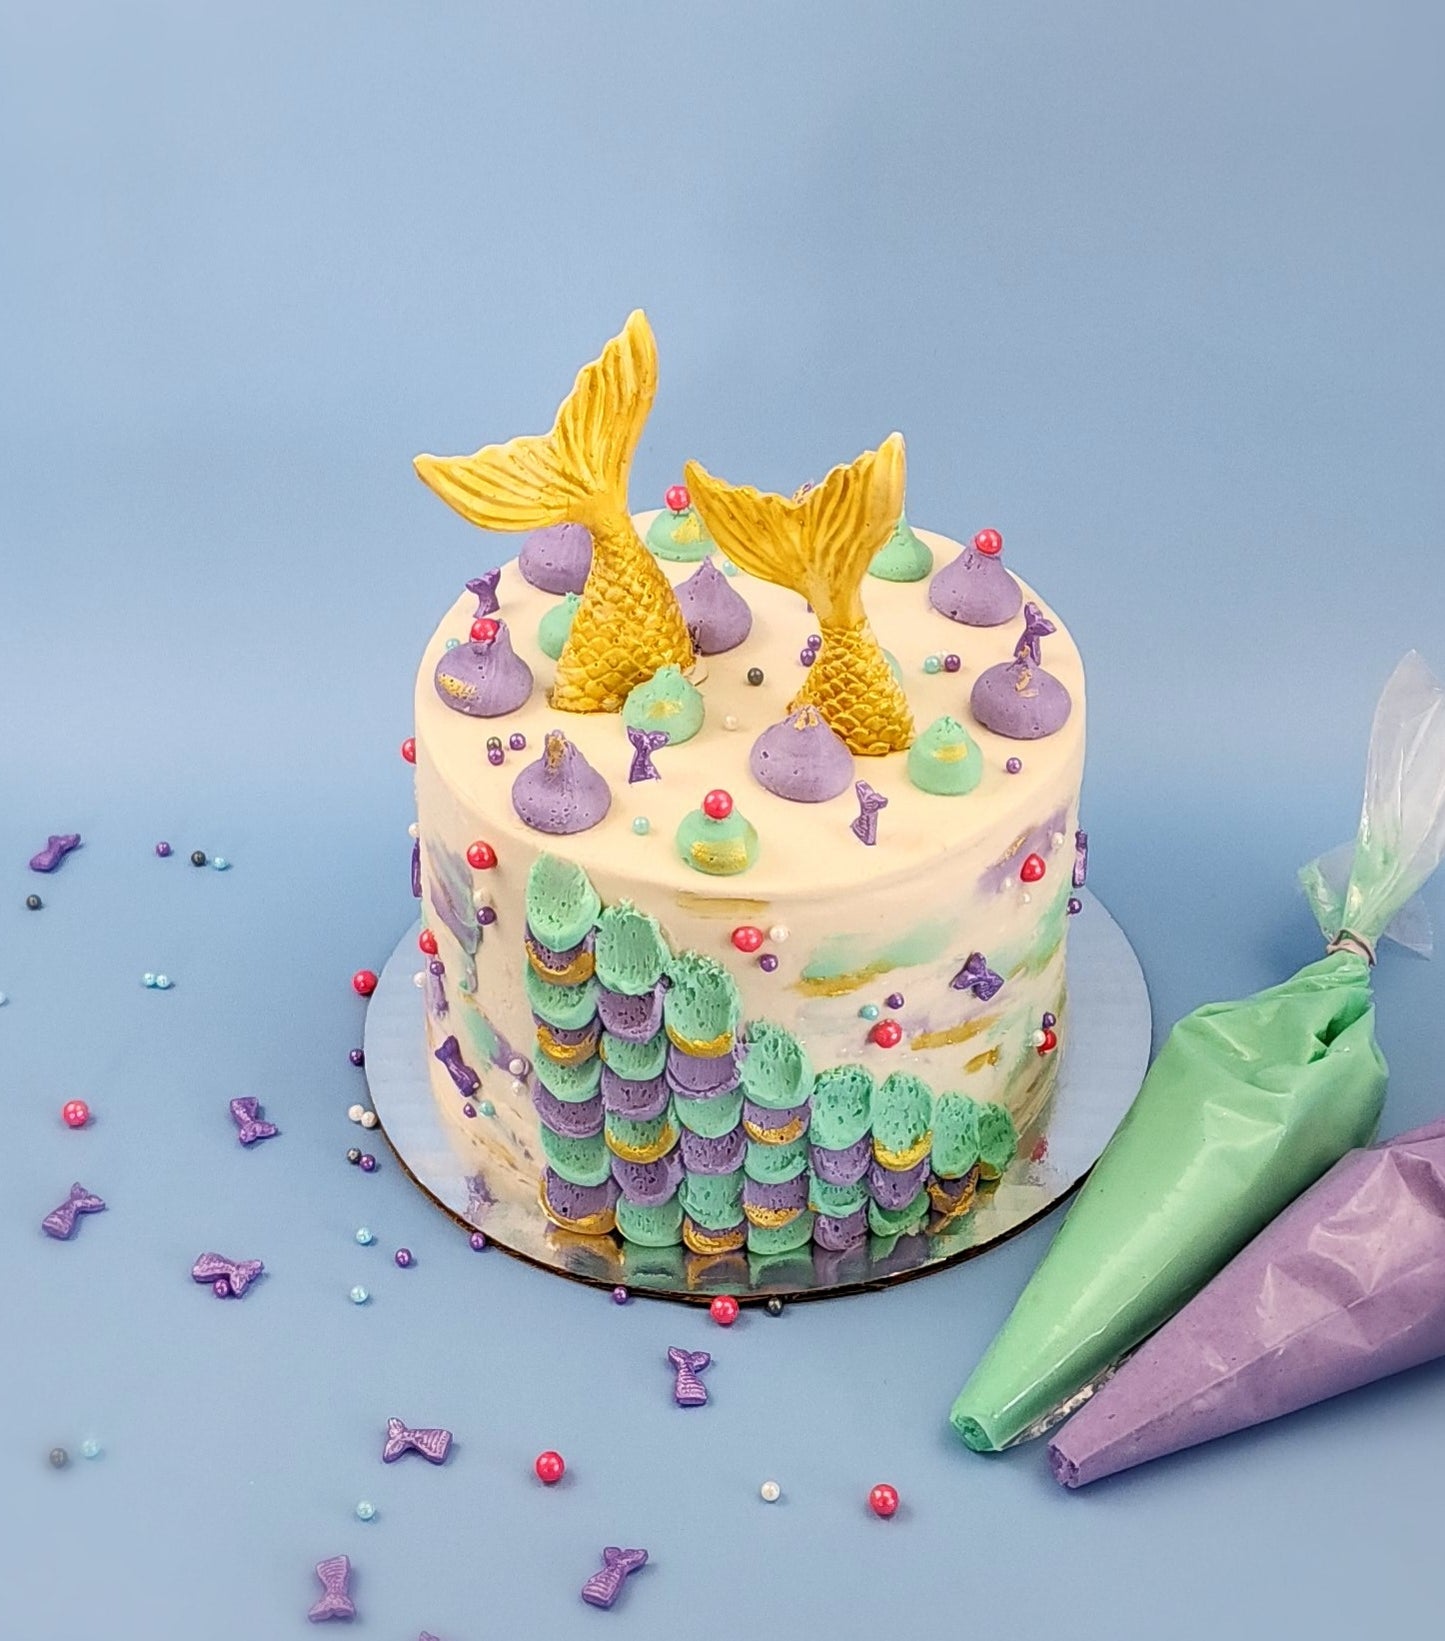 The finished DIY mermaid cake decorated with pink, purple, blue, white, and gray sprinkles, purple mermaid tales, and two large gold mermaid tales sticking out of the top. Two piping bags, one with teal and one with purple frosting, sit next to the cake, surrounded by sprinkles on a blue background.